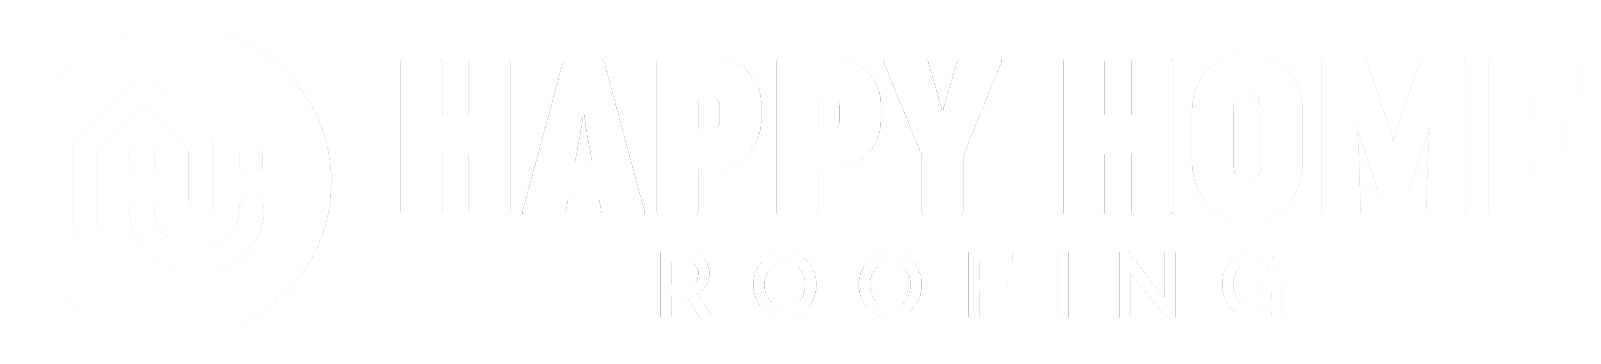 Happy Home Roofing Hagerstown, MD